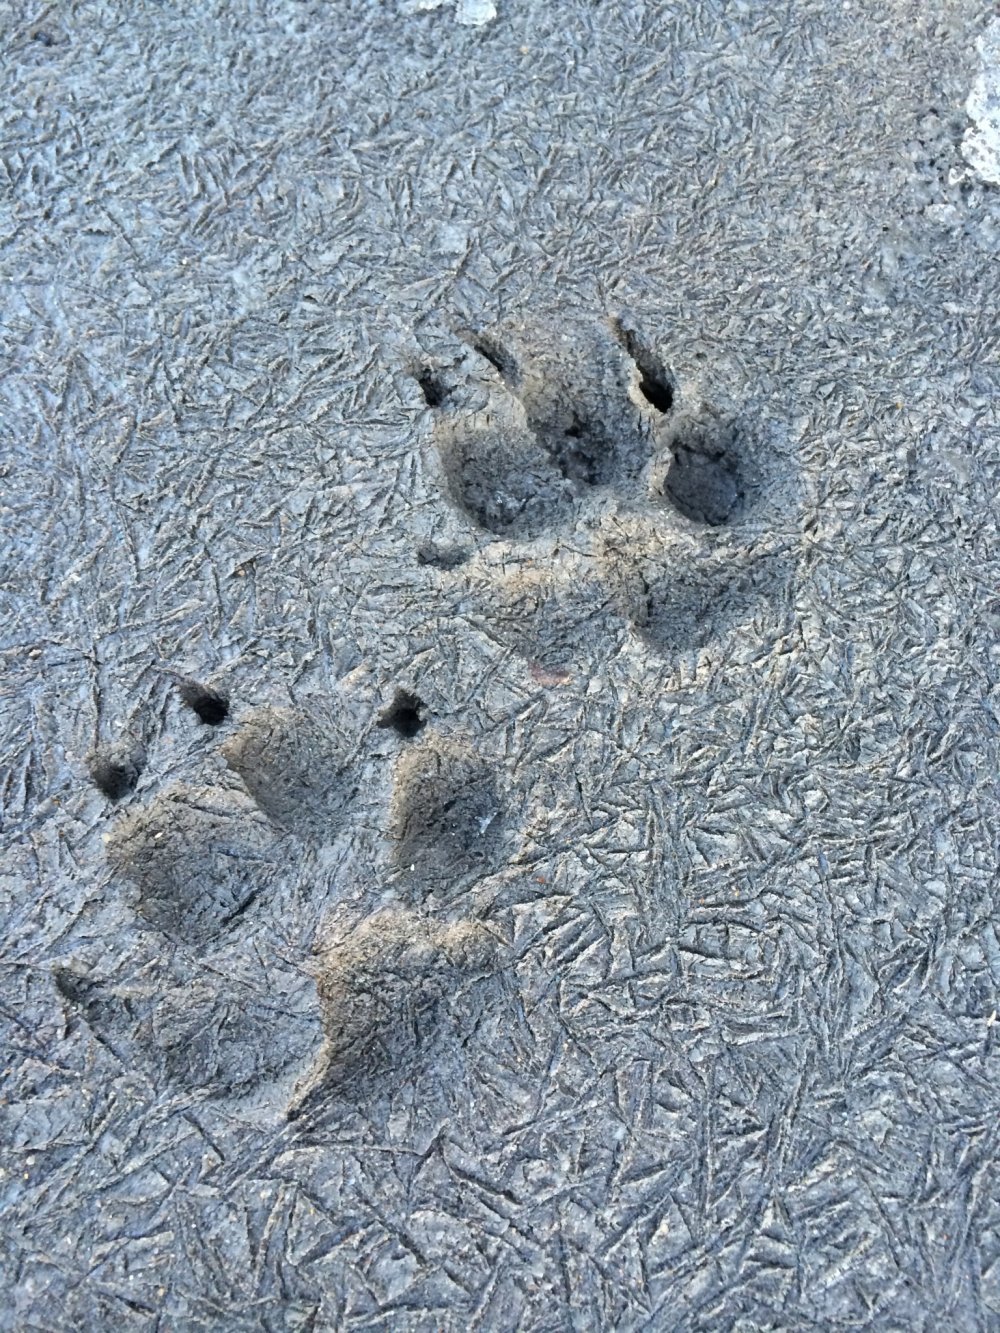 Perhaps a dog went for a walk on a cold day -- we can see its footprints because there is no snow on the ground!
